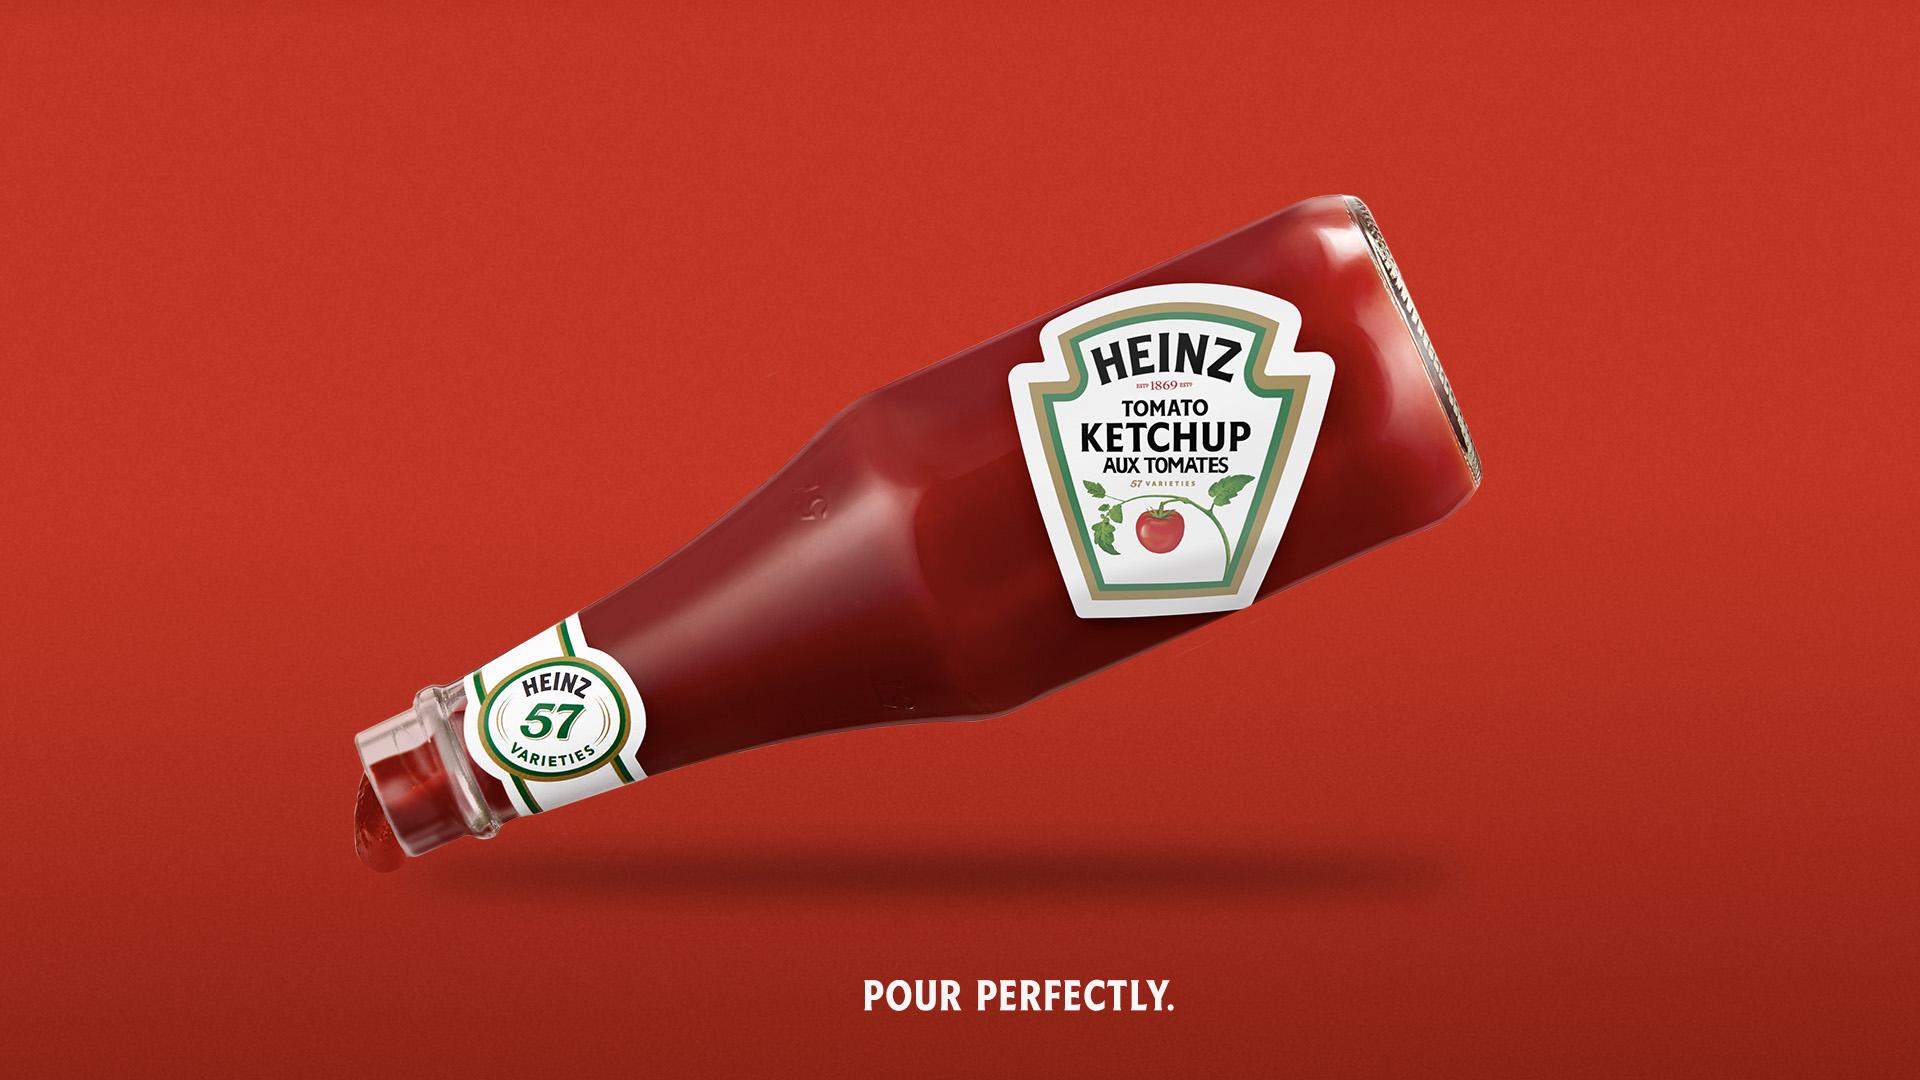 Heinz Ketchup - The Pour-Perfect Bottle